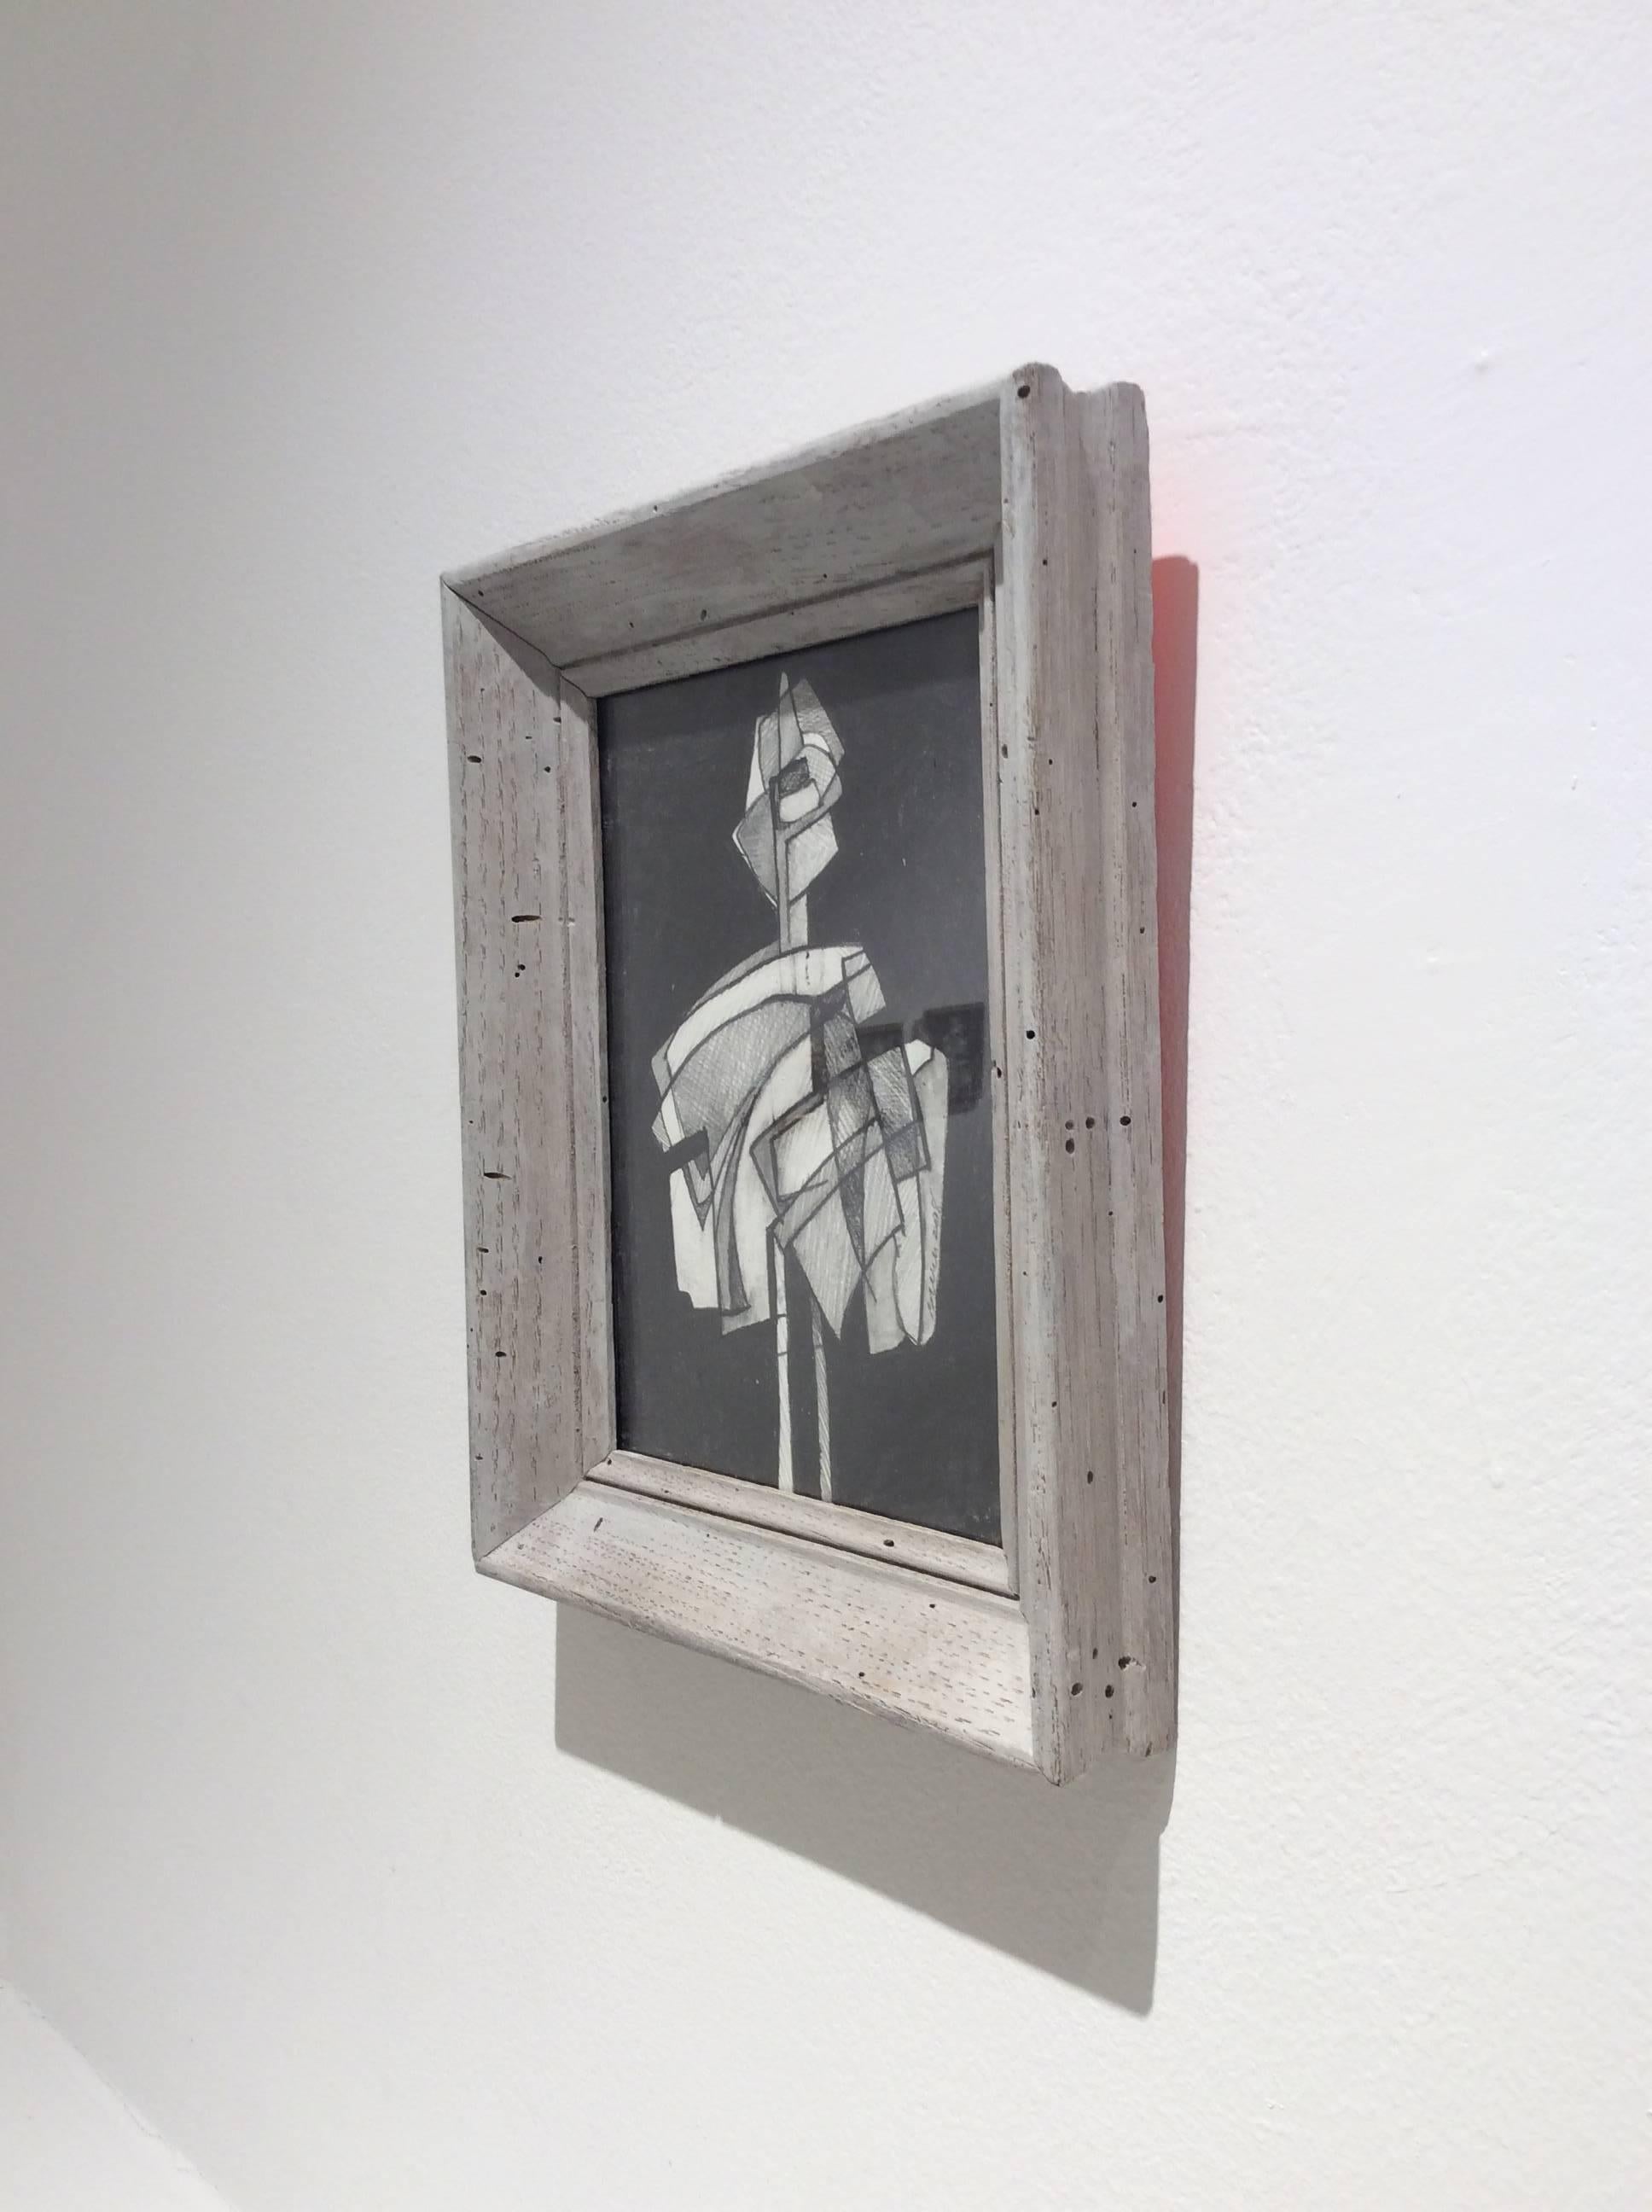 Abstract graphite drawing on paper in vintage gray painted wood frame
10.25 x 8.25

This abstract figurative graphite drawing on paper was inspired by academic paintings of the Infanta Margarita. The work is drawn in an abstracted cubist style where